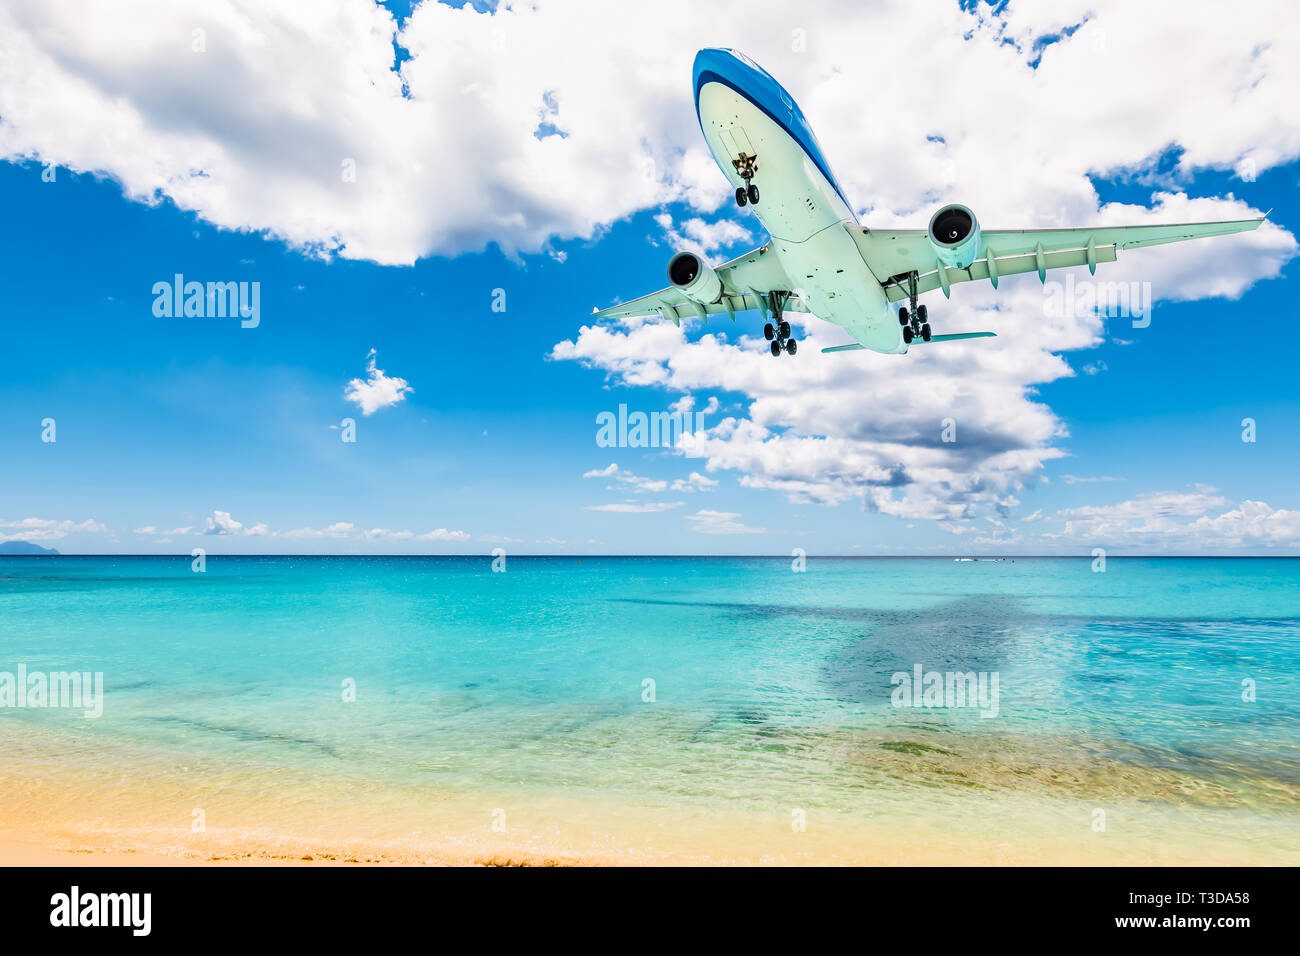 Plane above sea and beach in St Maarten, Caribbean. Travel and air transportation background. Stock Photo